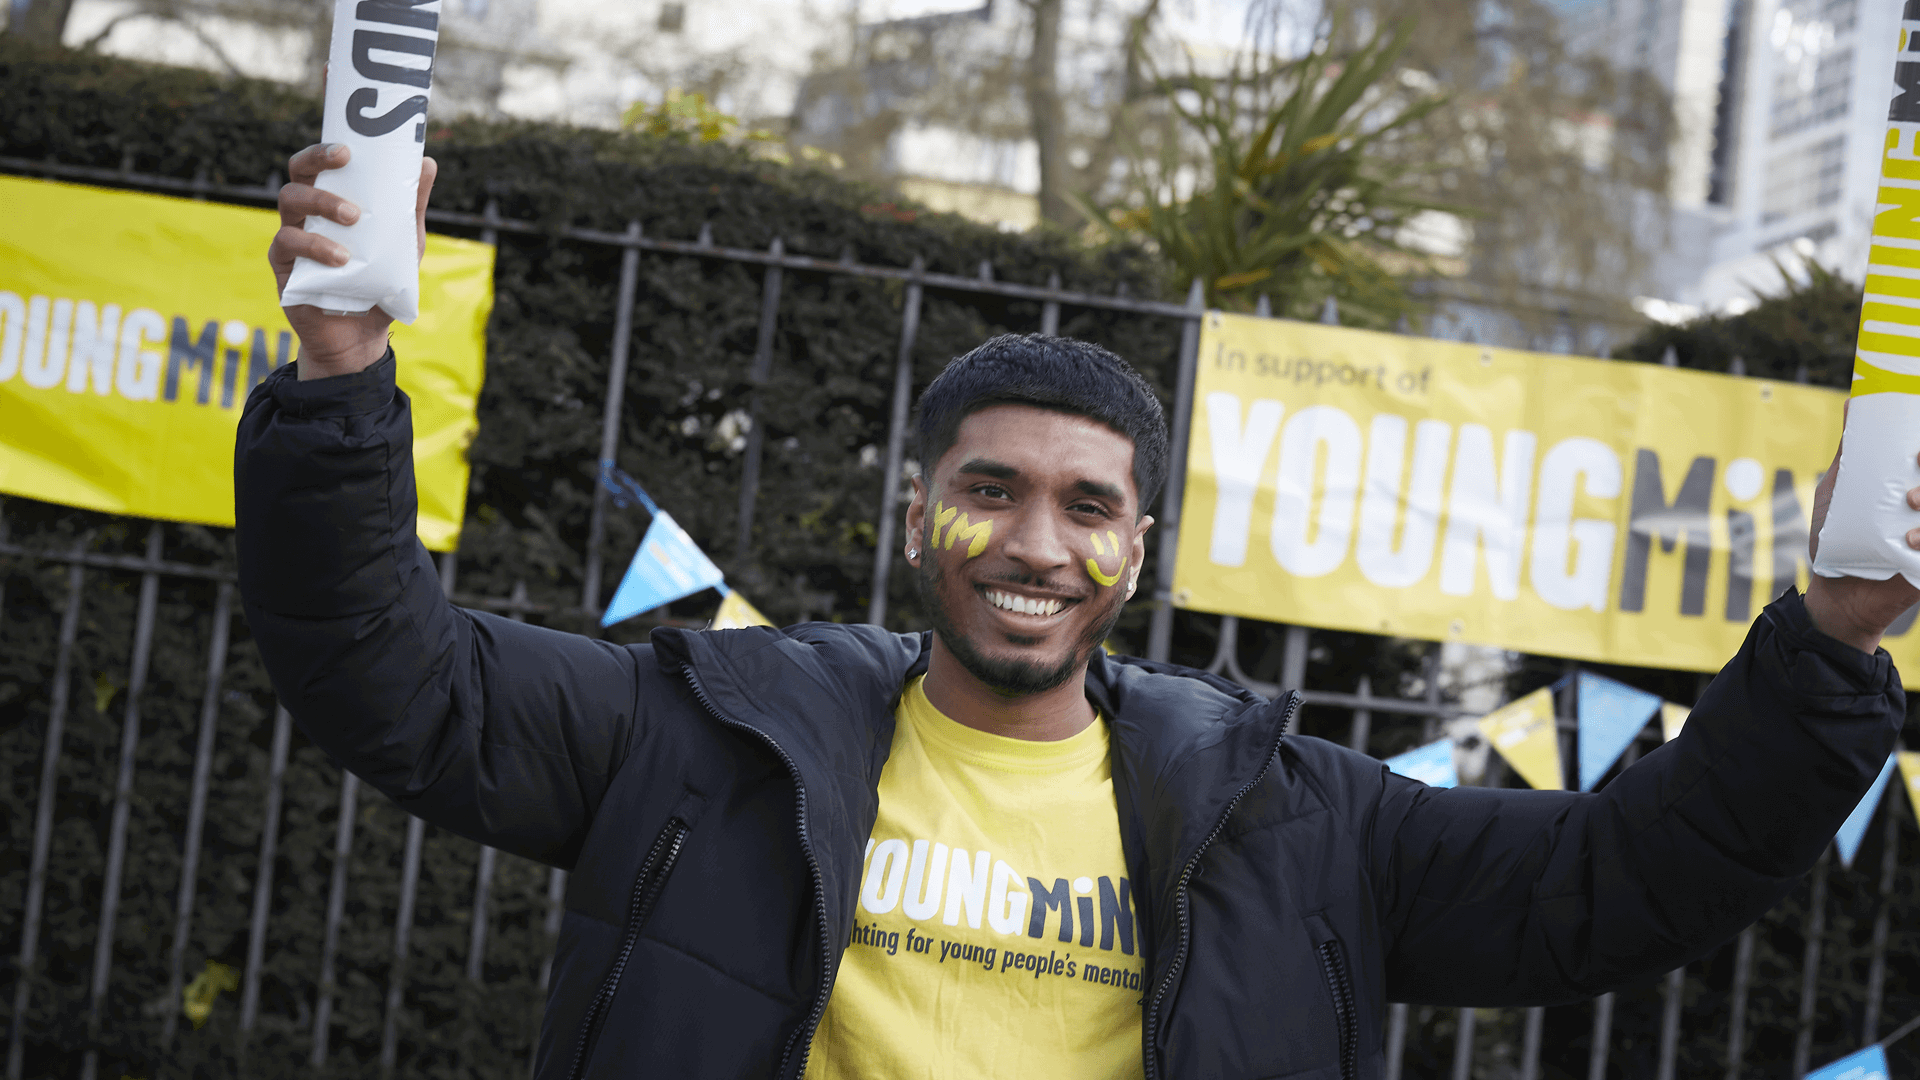 Volunteer in YoungMinds top, yellow face paint and black coat smiles in front of bunting and banners, with arms up holding cheer sticks.